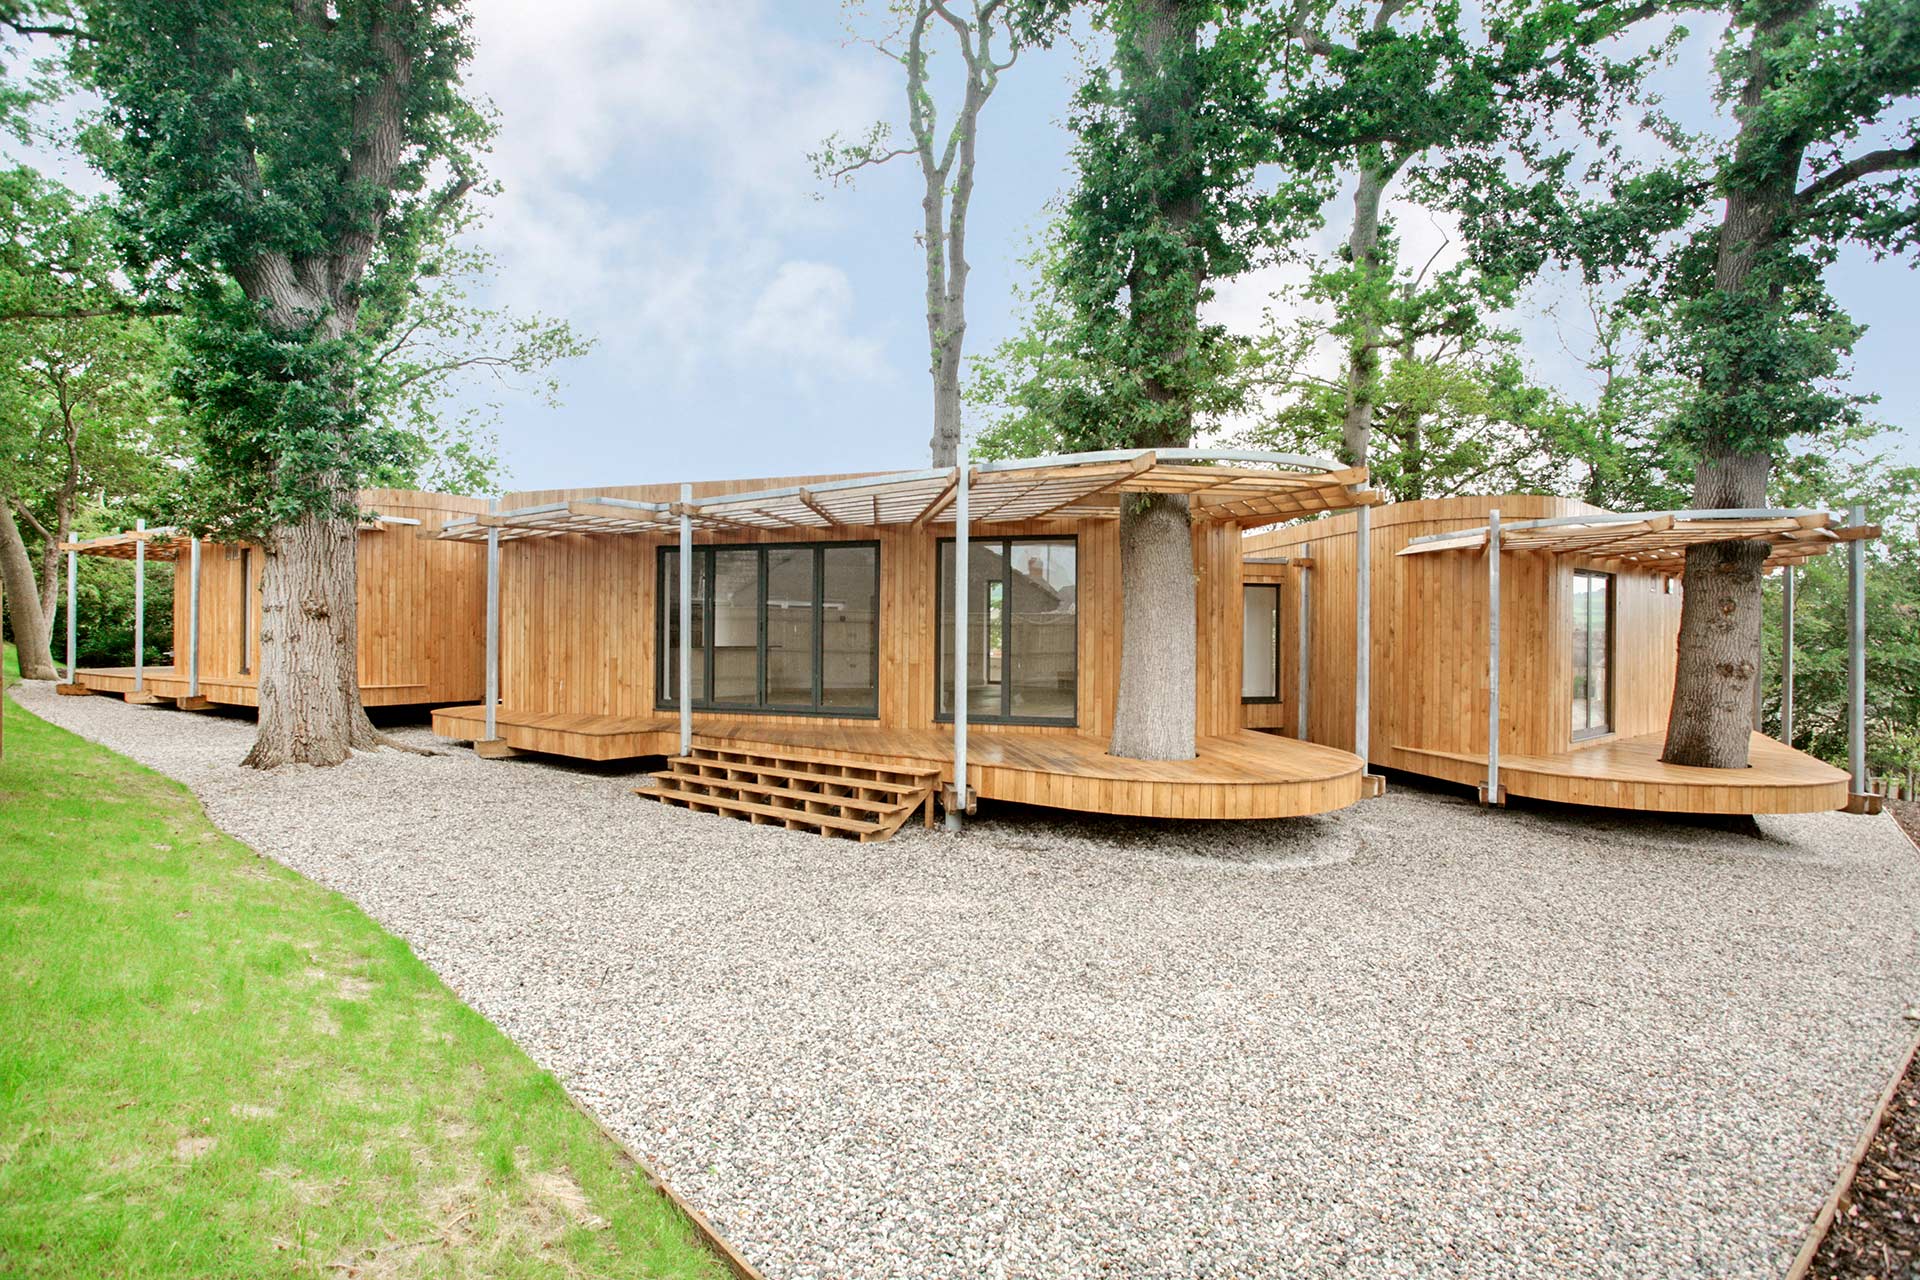 timber cladded house in pod style surrounded by trees